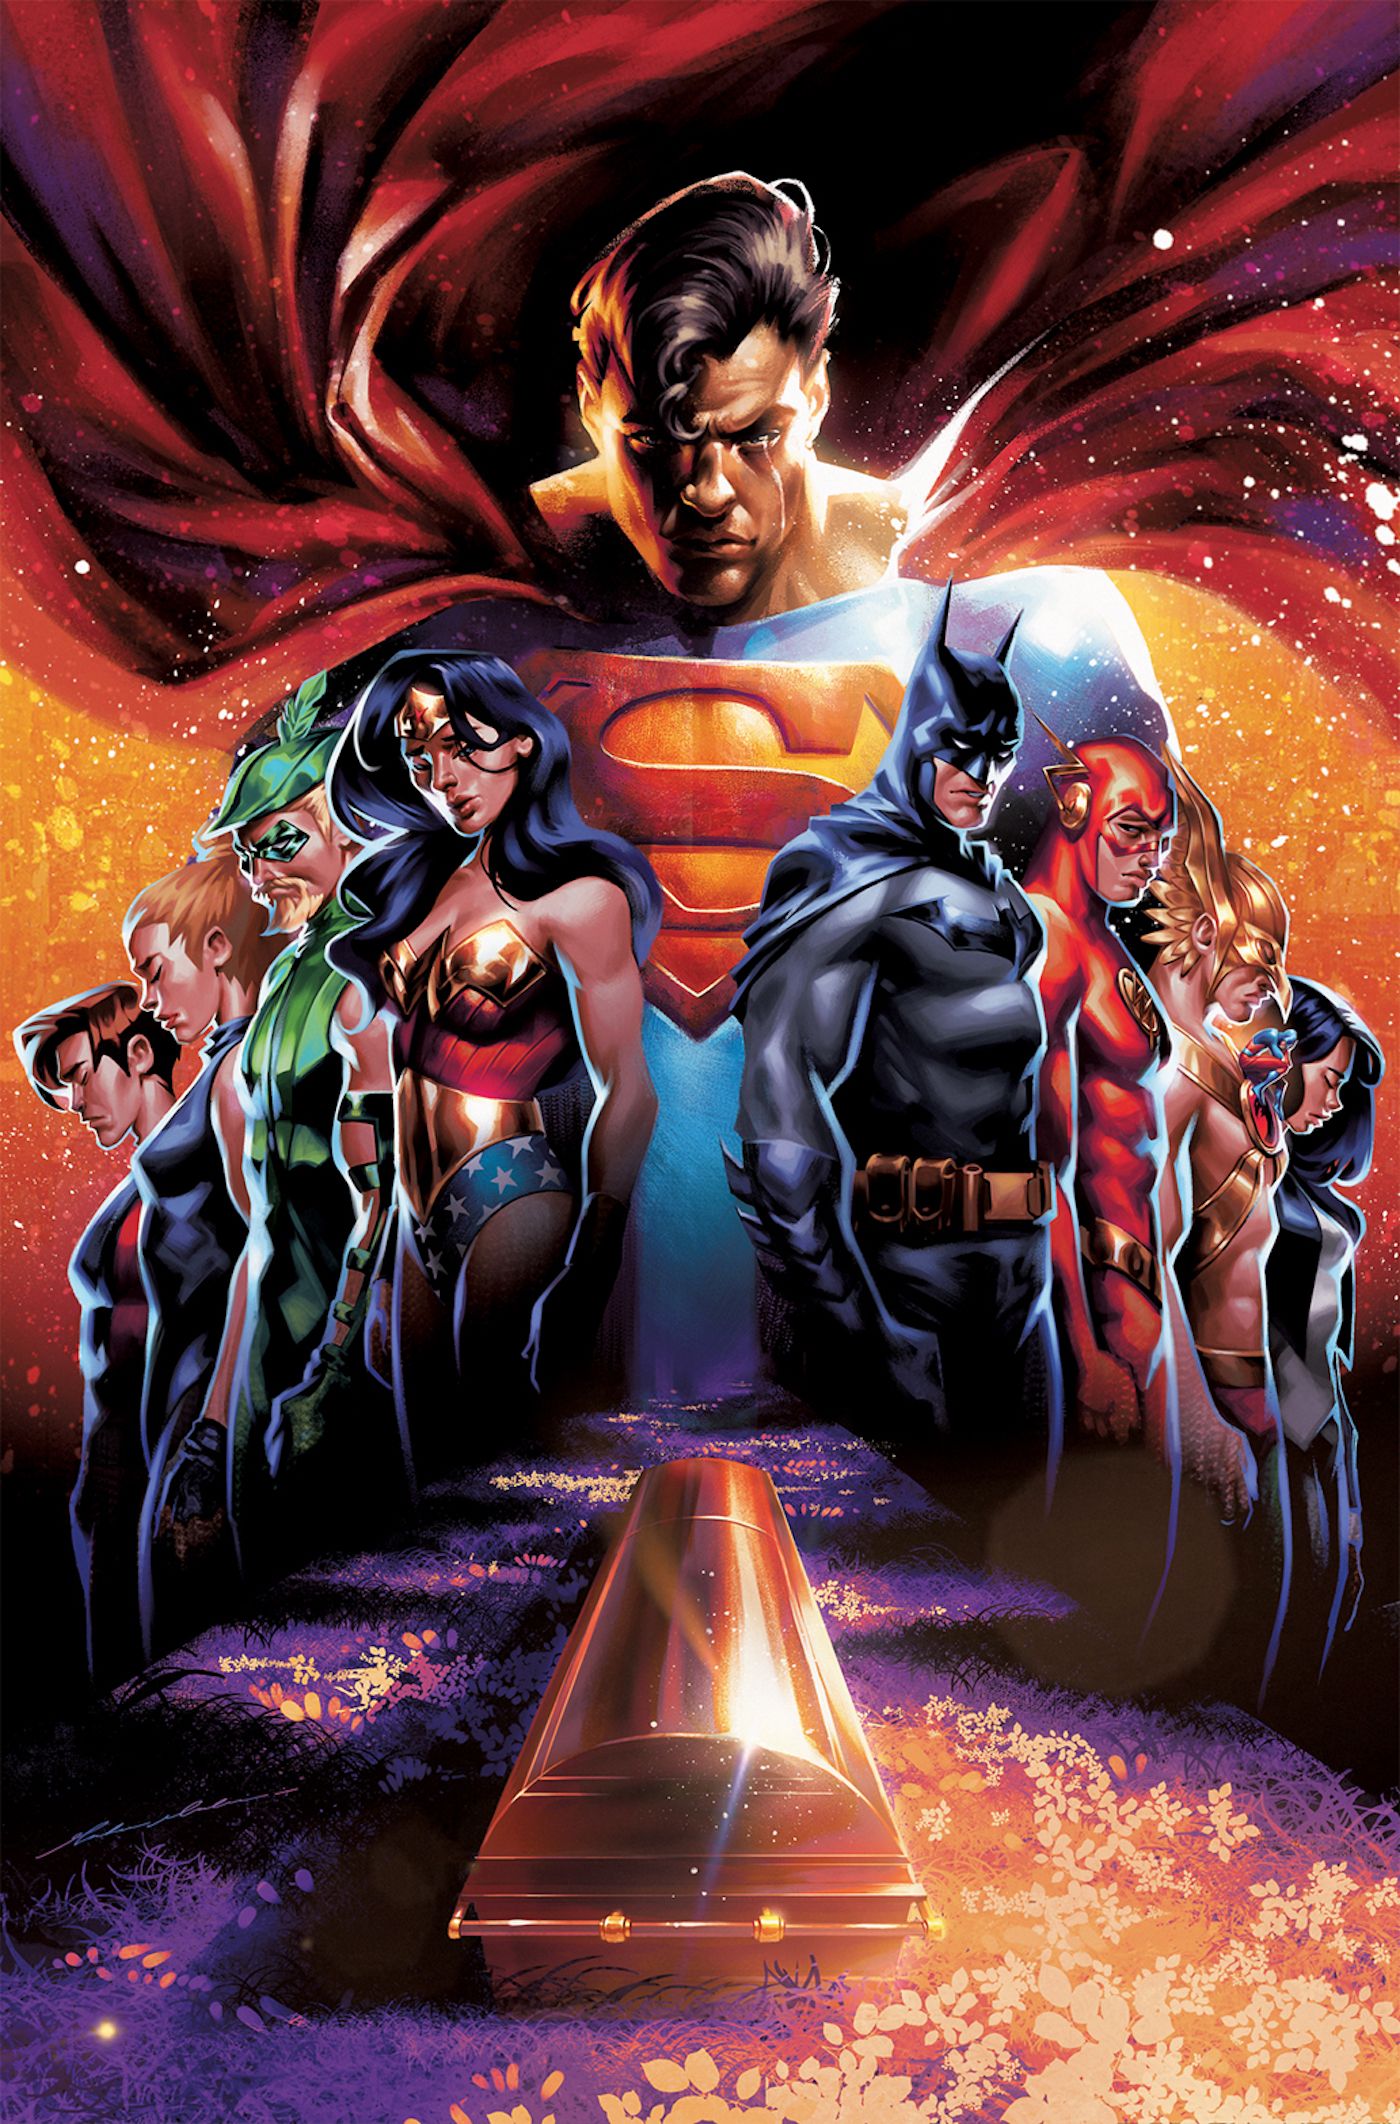 A Justice League Hero Will Die in DC’s Dark Crisis on Infinite Earths